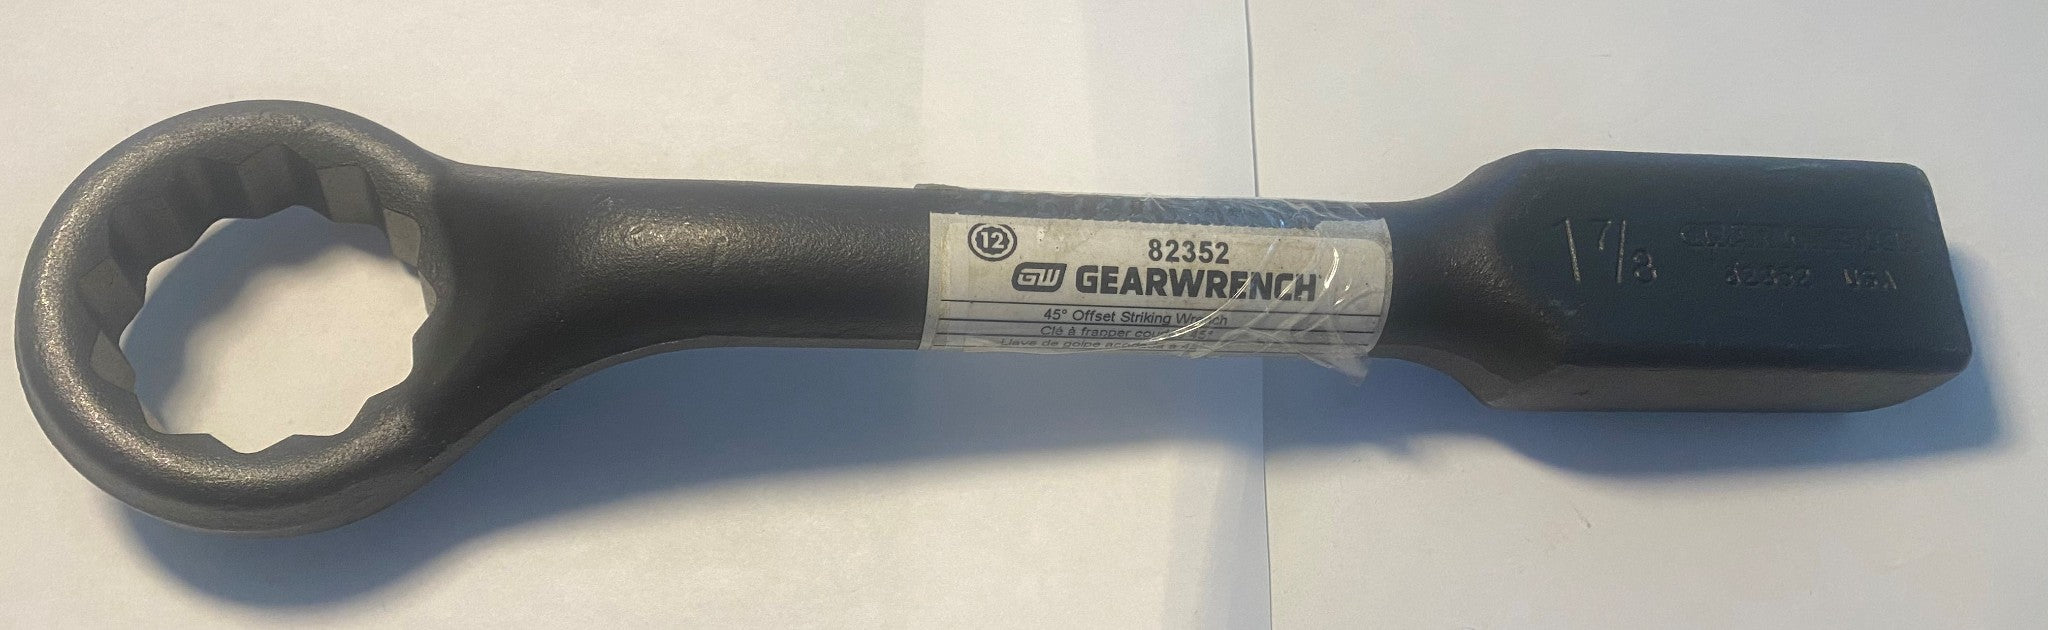 GEARWRENCH 82352 1-7/8" Offset Striking Wrench 45° 12 Point USA